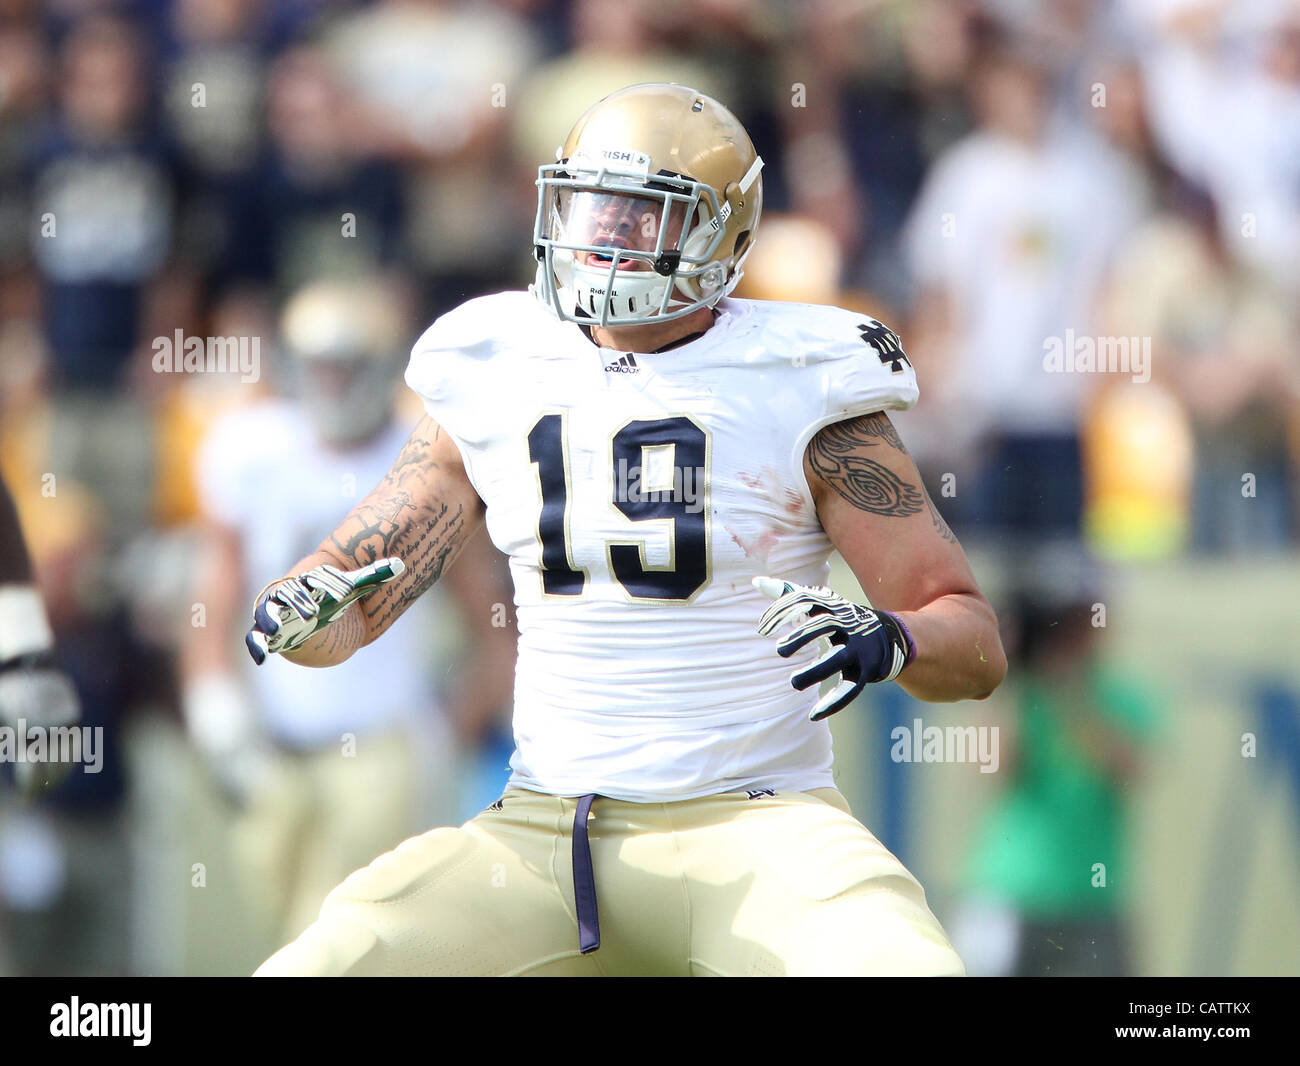 Sept. 24, 2011 - Pittsburgh, Pennsylvania, USA - Notre Dame's Aaron Lynch (19). The Notre Dame Fighting Irish were able to hold onto a slight lead to beat the University of Pittsburgh Panthers in Hienz Field.  Photo By Aaron Suozzi (Credit Image: © Aaron Souzzi/ZUMAPRESS.com) Stock Photo